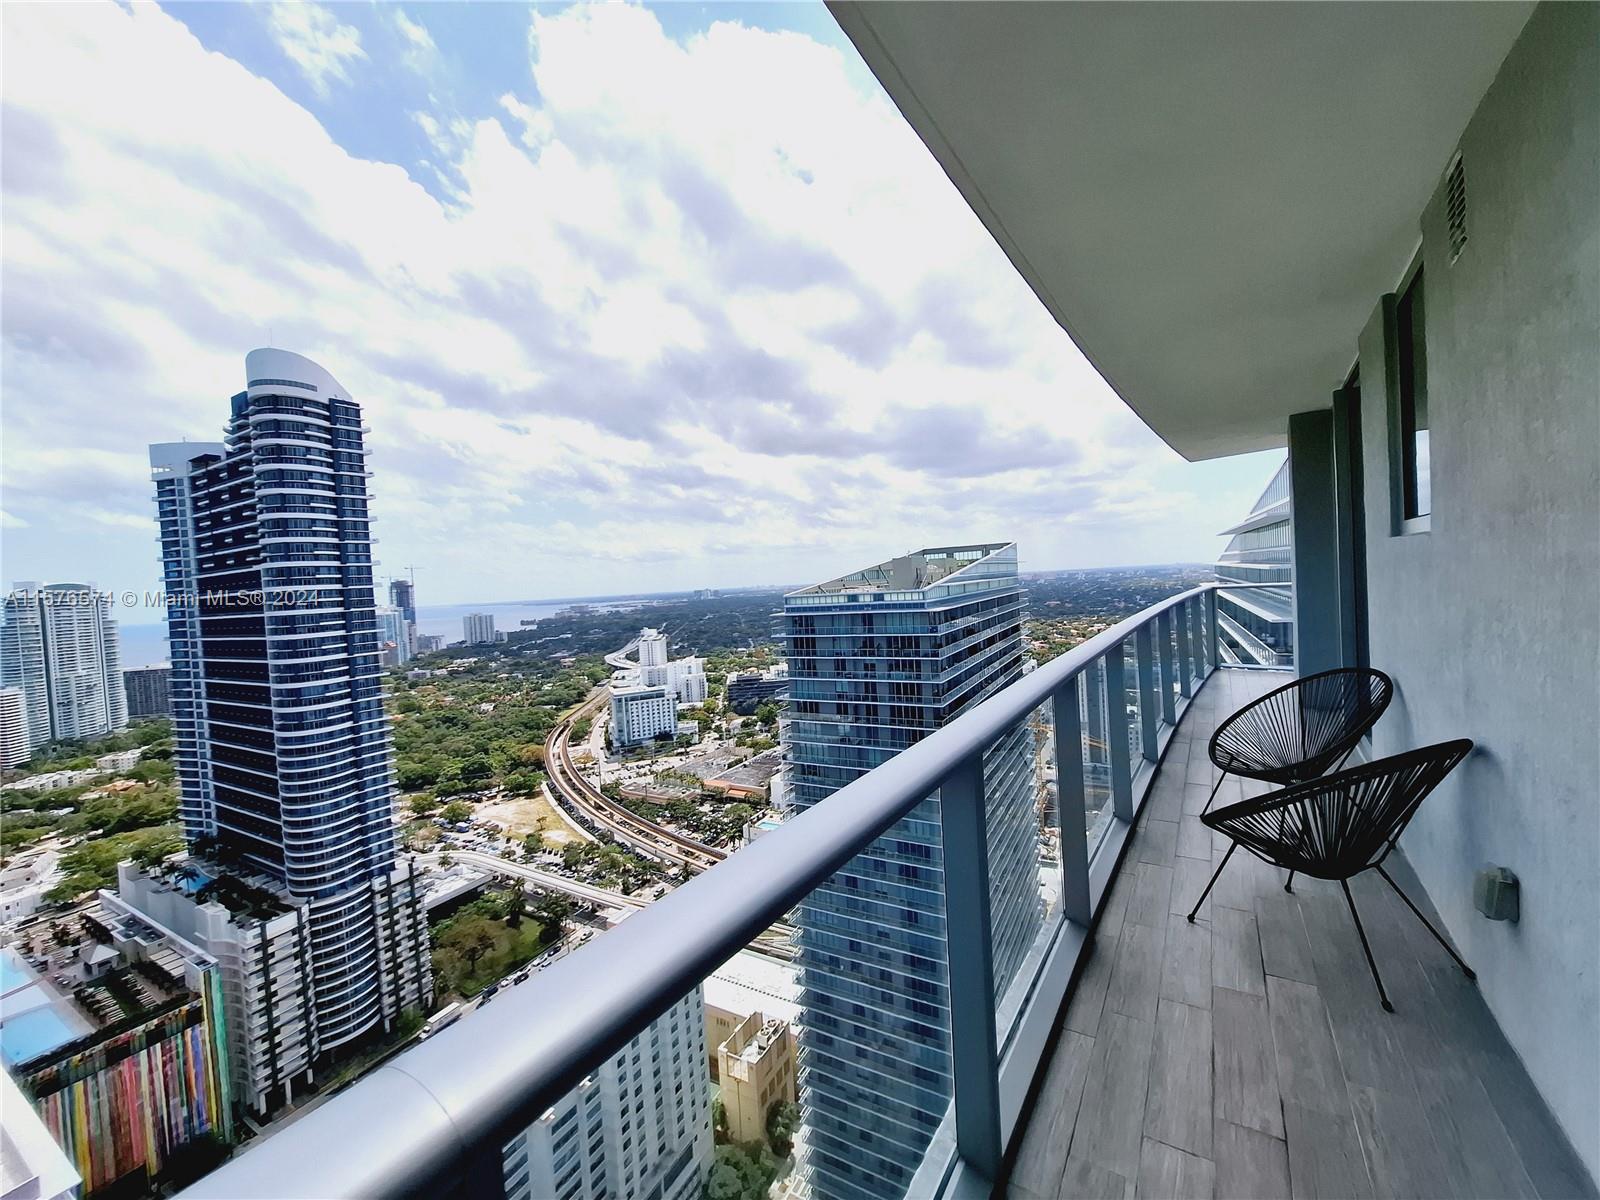 This is truly living in the vibrant heart of Brickell. Enjoy breathtaking panoramic city and water views from above in this fully-furnished 2 bedroom 2 bathroom corner unit within the prestigious Millecento building, designed by the renowned Ferrari designer Pininfarina. This signature building created by the prominent architect Carlos Ott, includes staggering-designed amenities with two swimming pools, including a Miami-worthy rooftop pool, pool-deck and playroom, a spacious clubhouse with pool table & library, movie theatre, gym, spa, meeting room & an on-site self-checkout mini store. Every corner around this neighborhood radiates exclusivity by a unique subtropical-urban lifestyle, filled with culinary delights, from bakeries to top-rated restaurants & bars, shops and boutique stores.